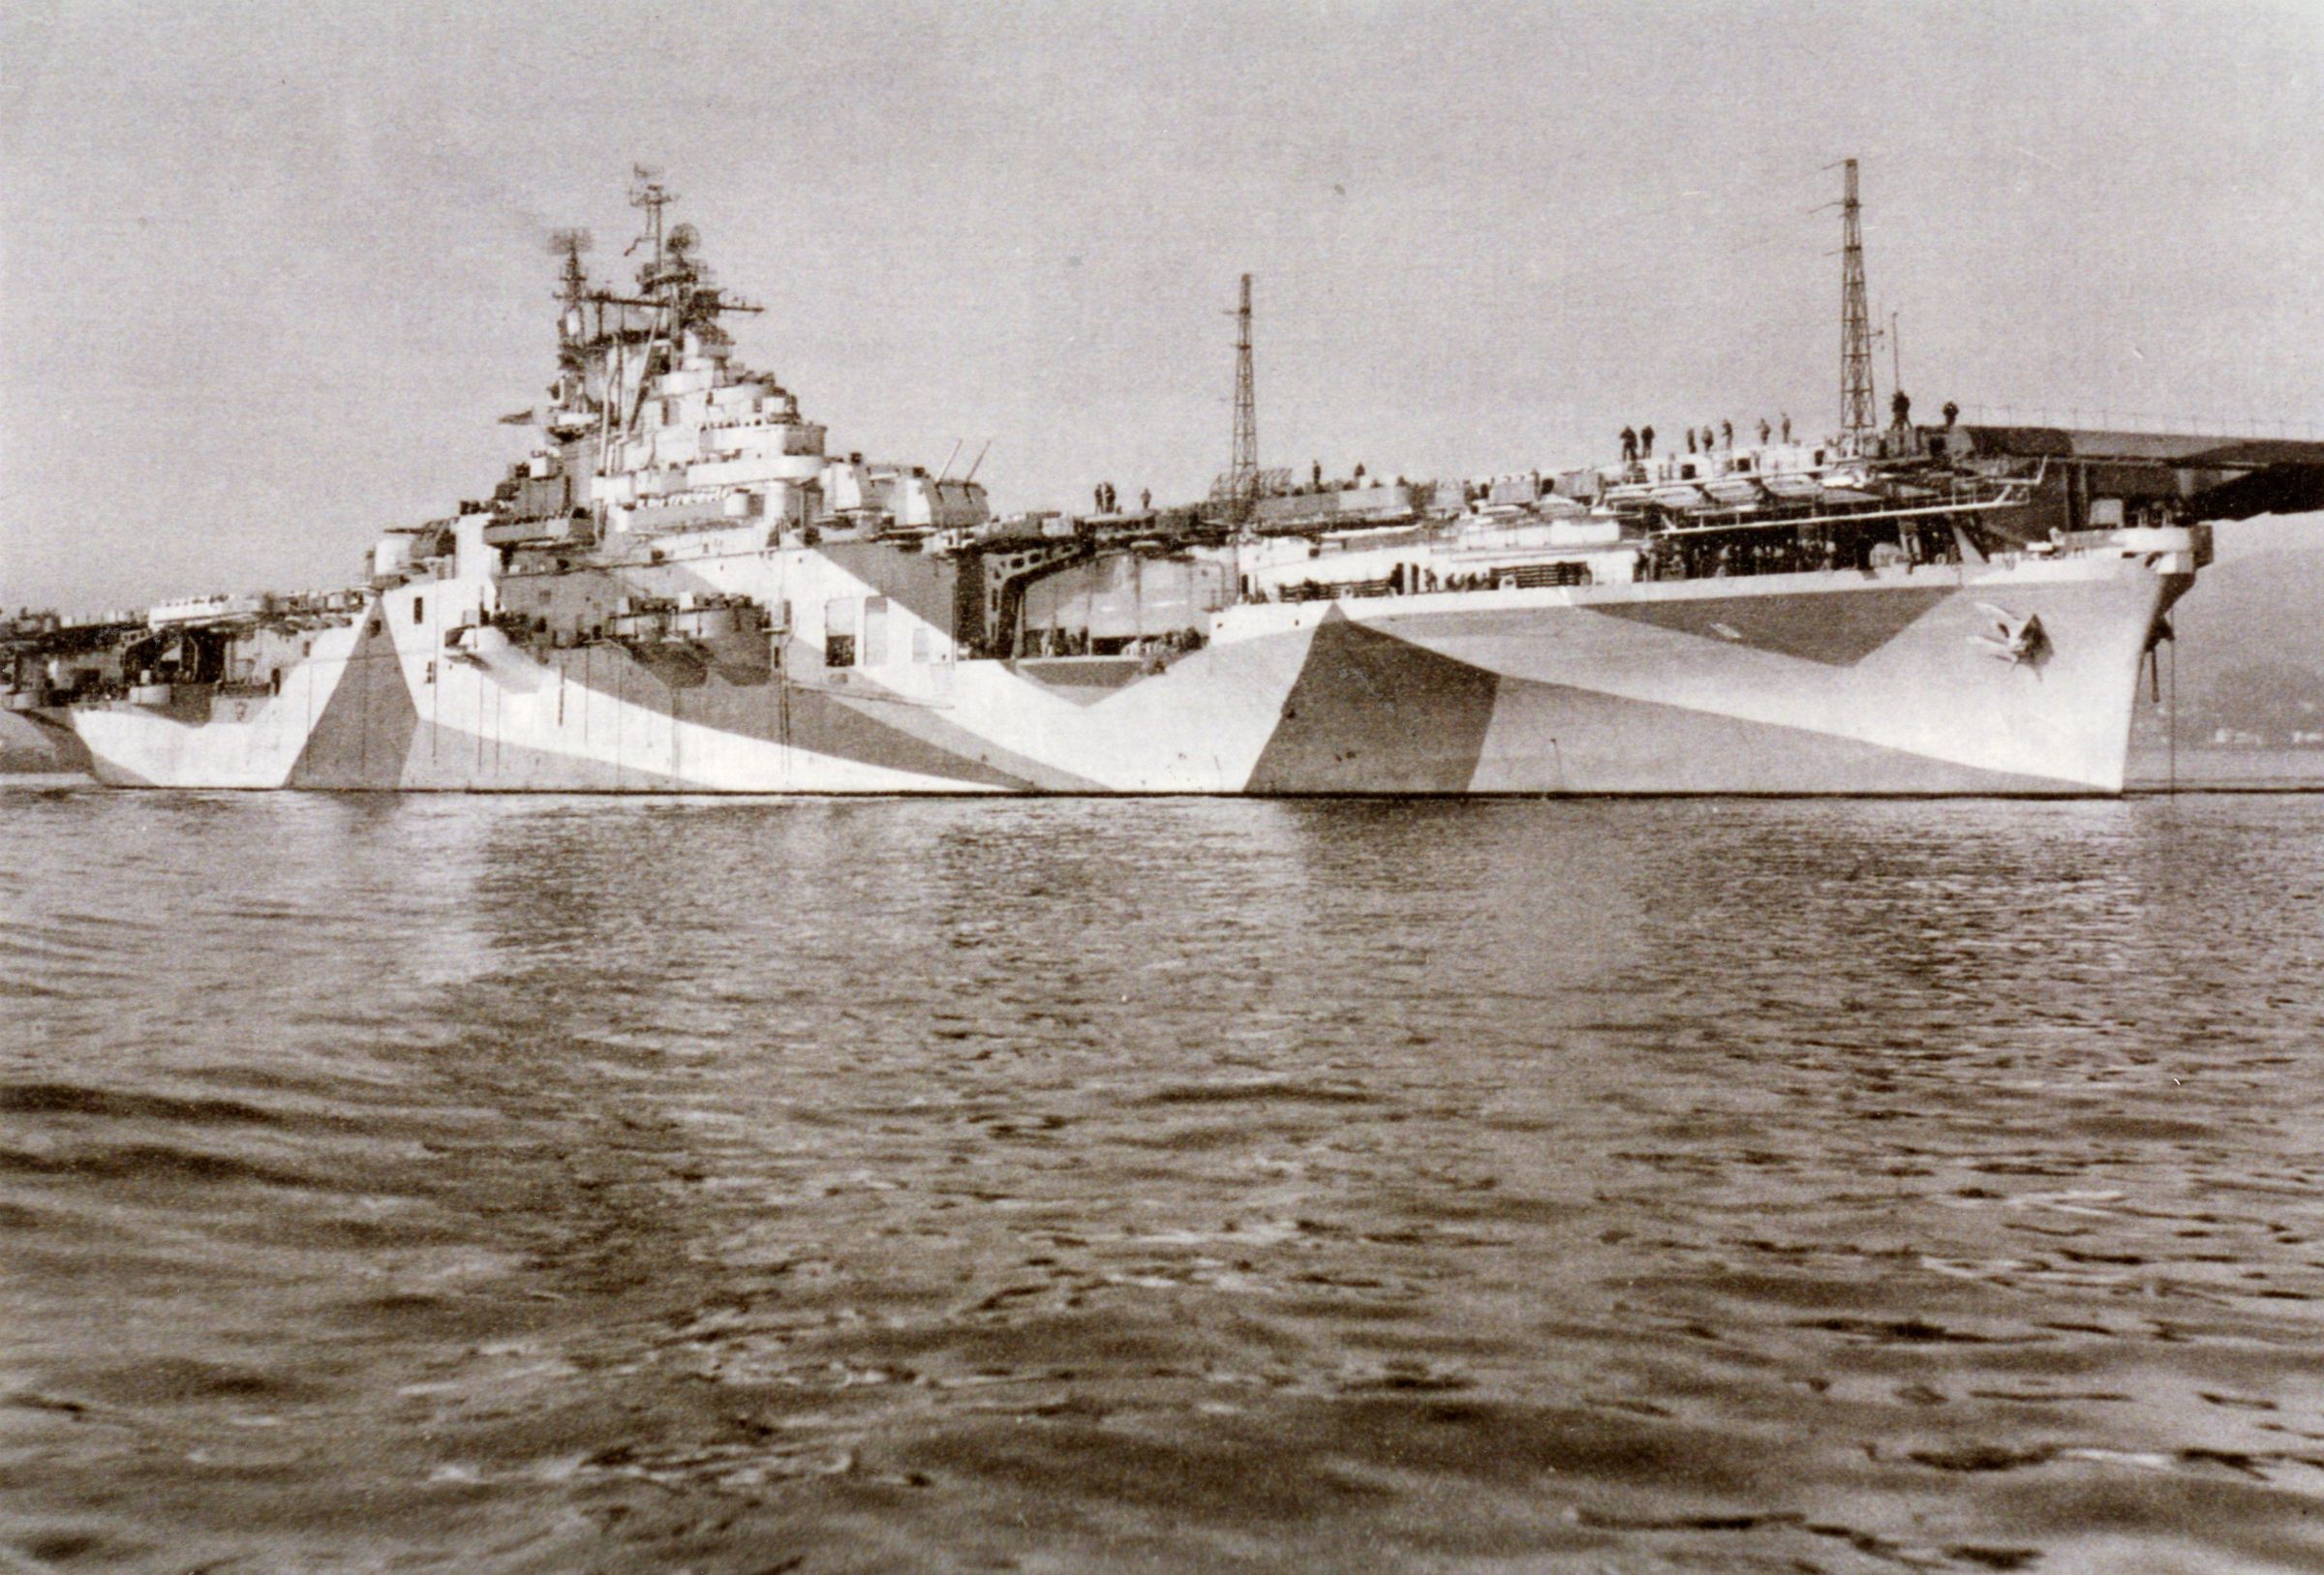 Primary Image of Starboard Bow View of the USS Yorktown (CV-10)